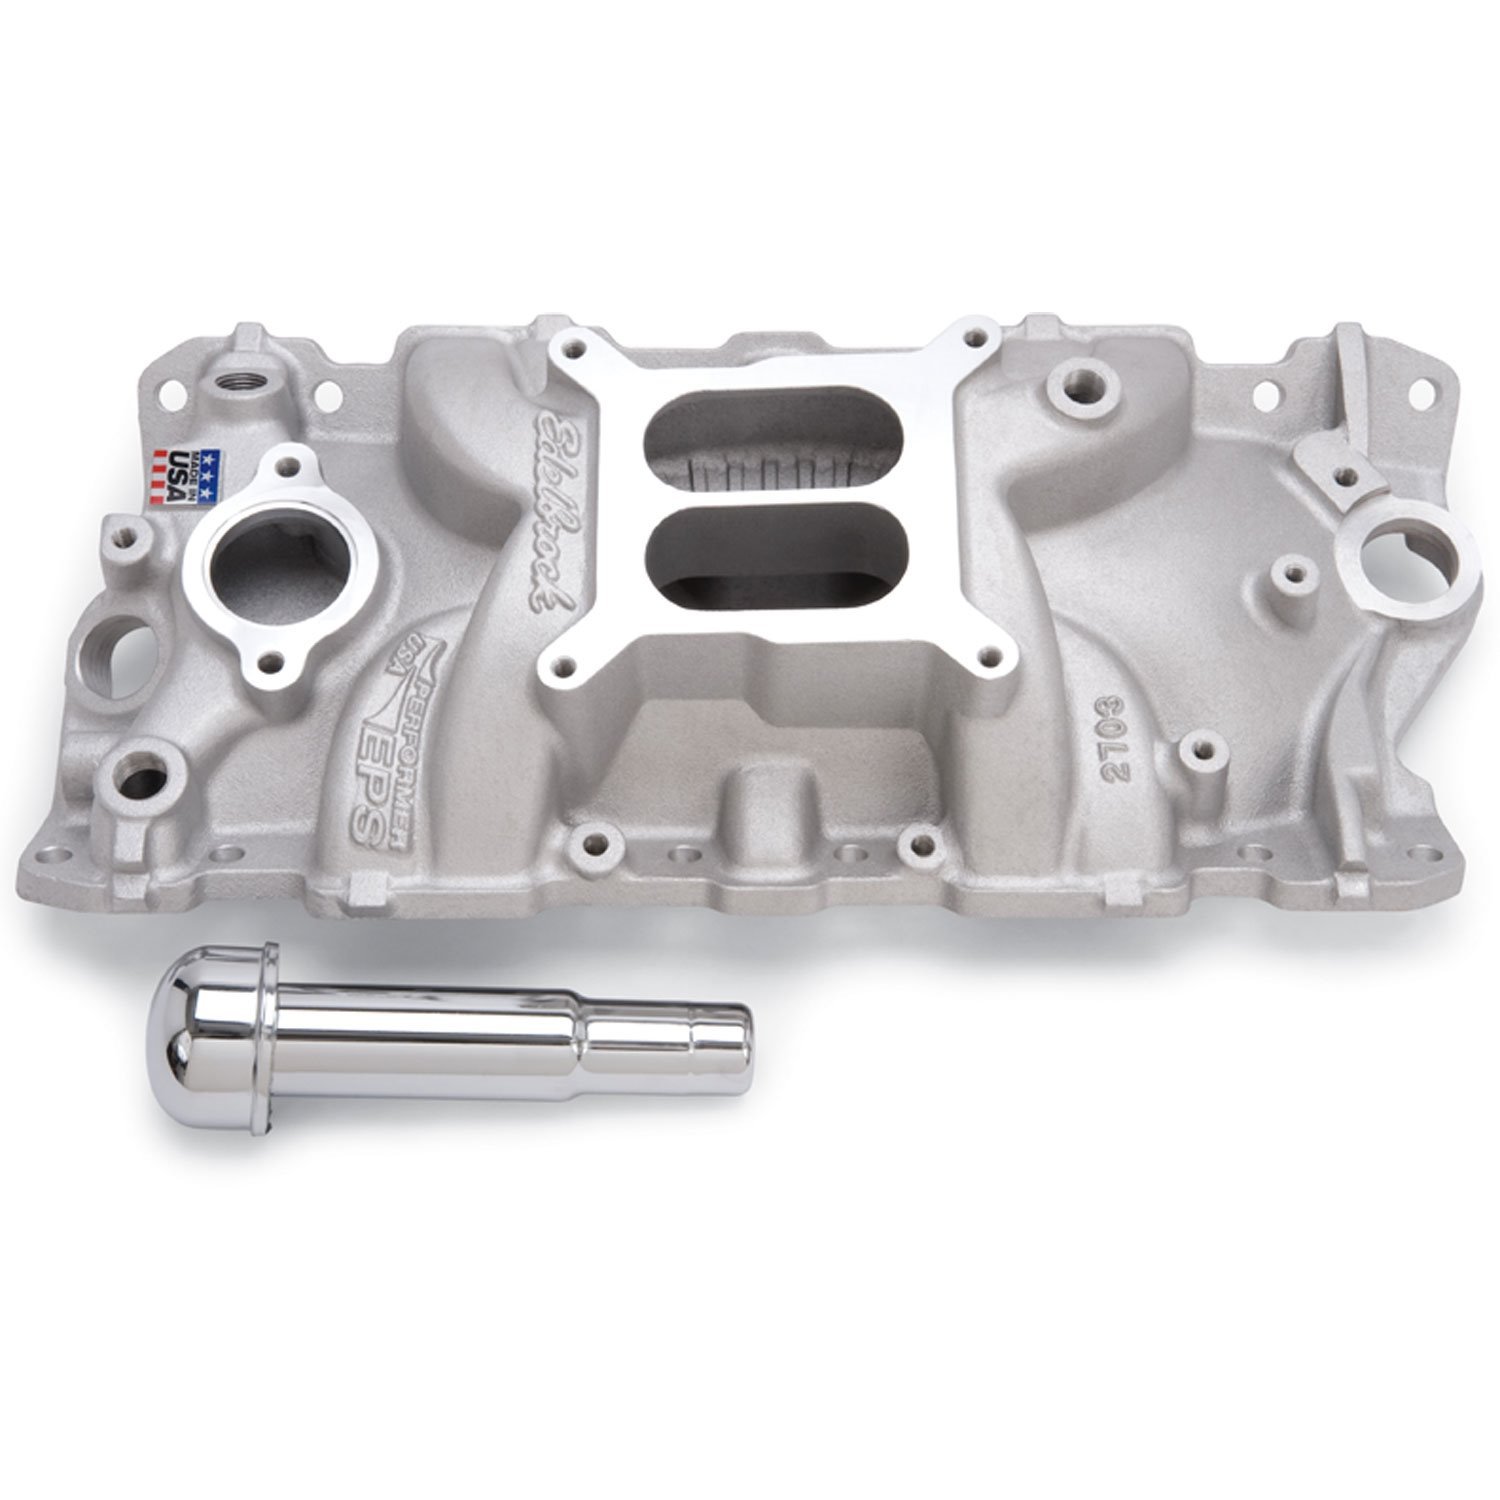 Performer EPS Intake Manifold for Small Block Chevy with Oil Fill Tube